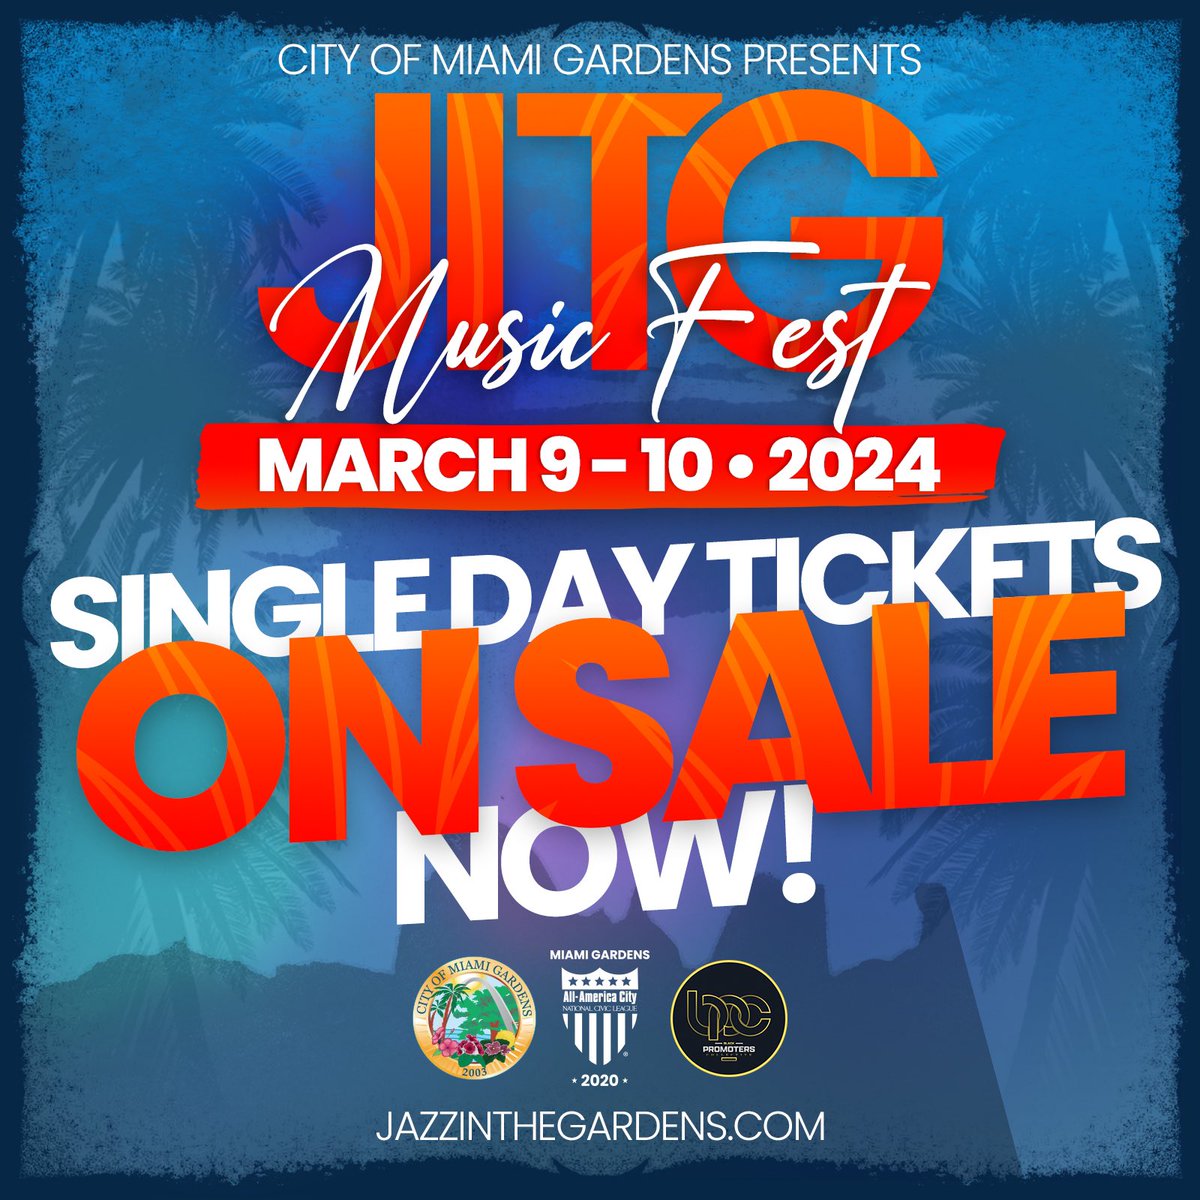 Drop everything! 🚨 Single-day tickets for #JITG2024 are ON SALE NOW! 🎉 Whether you're vibing on Saturday or getting soulful on Sunday, we've got you covered. 🎶 Don't miss out on the ultimate music experience in Miami Gardens. Grab your tickets at jazzinthegardens.com! 🌴👉🏾